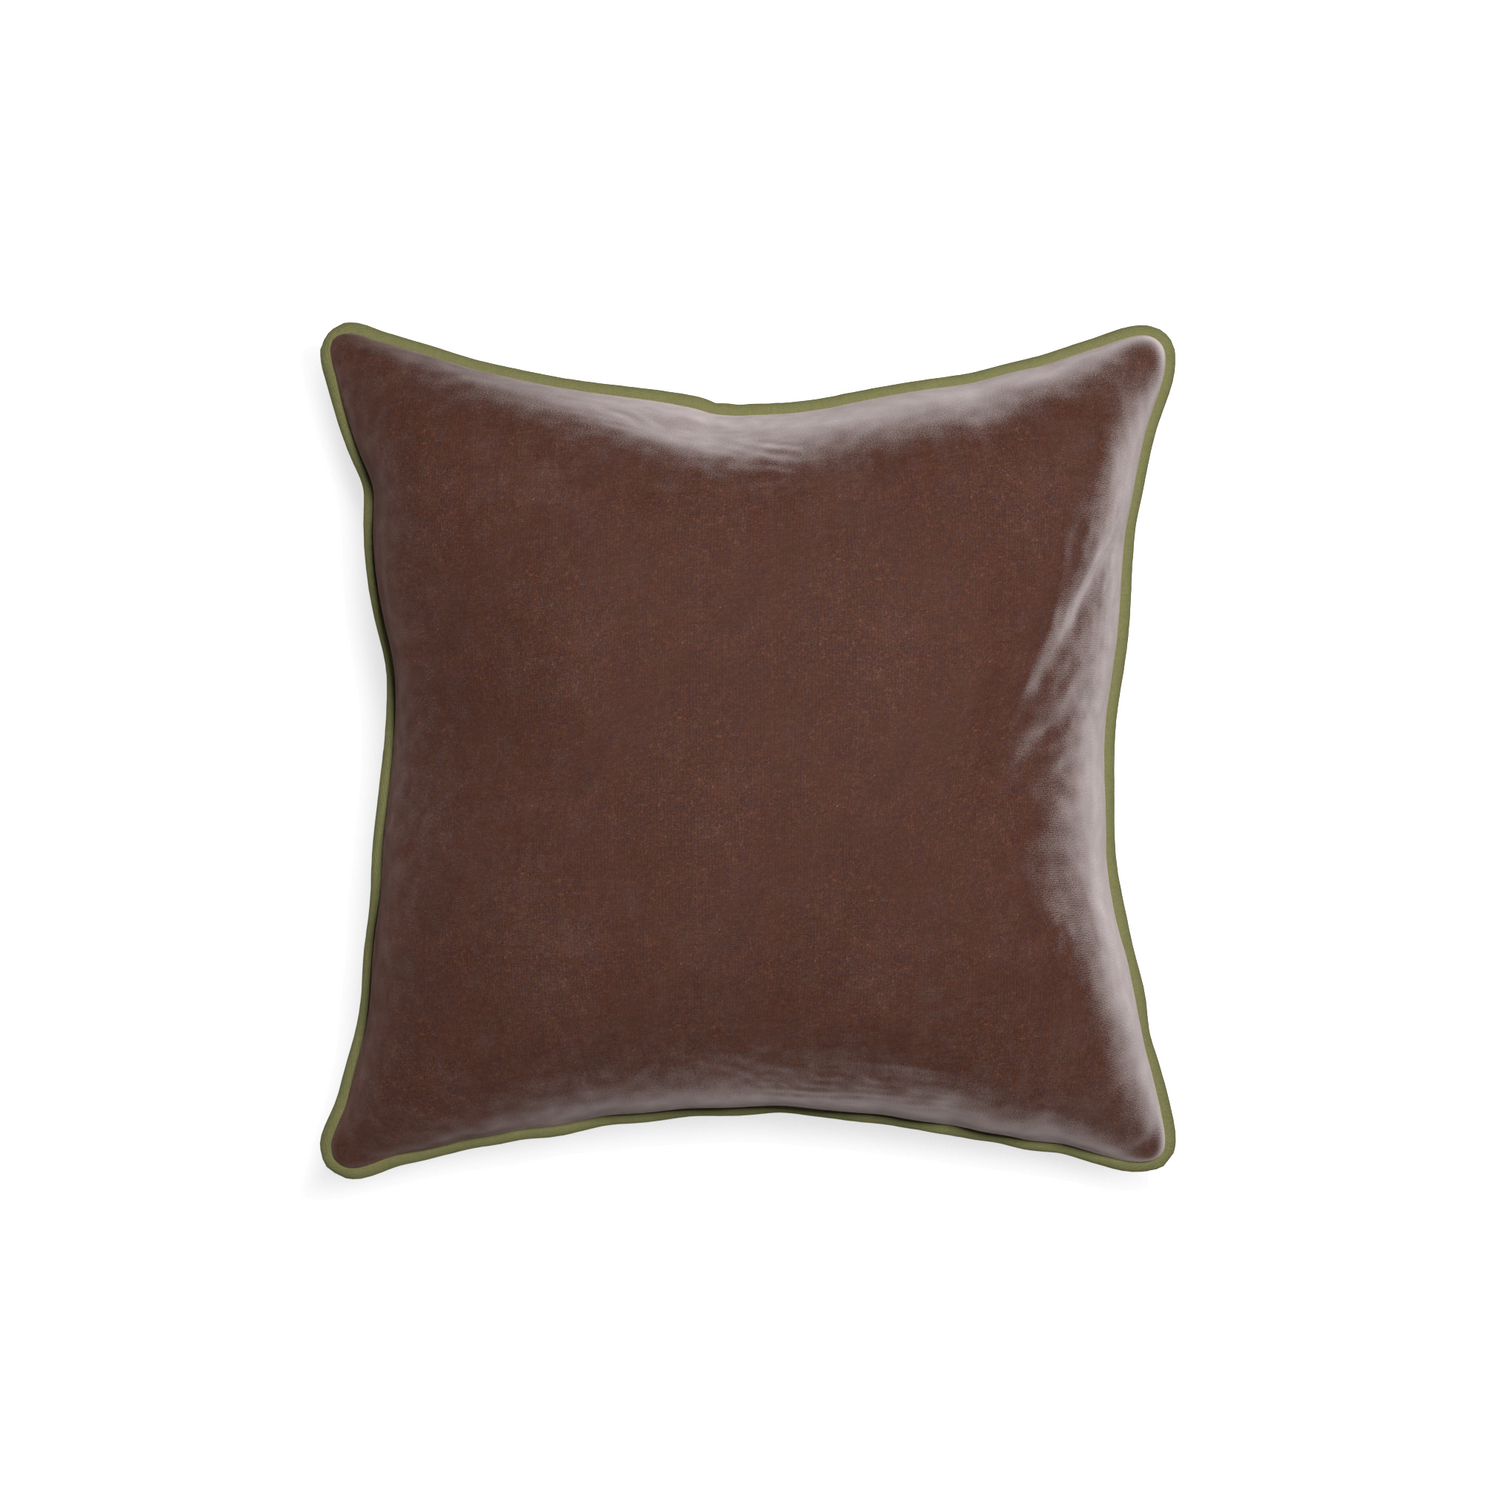 square brown velvet pillow with moss green piping